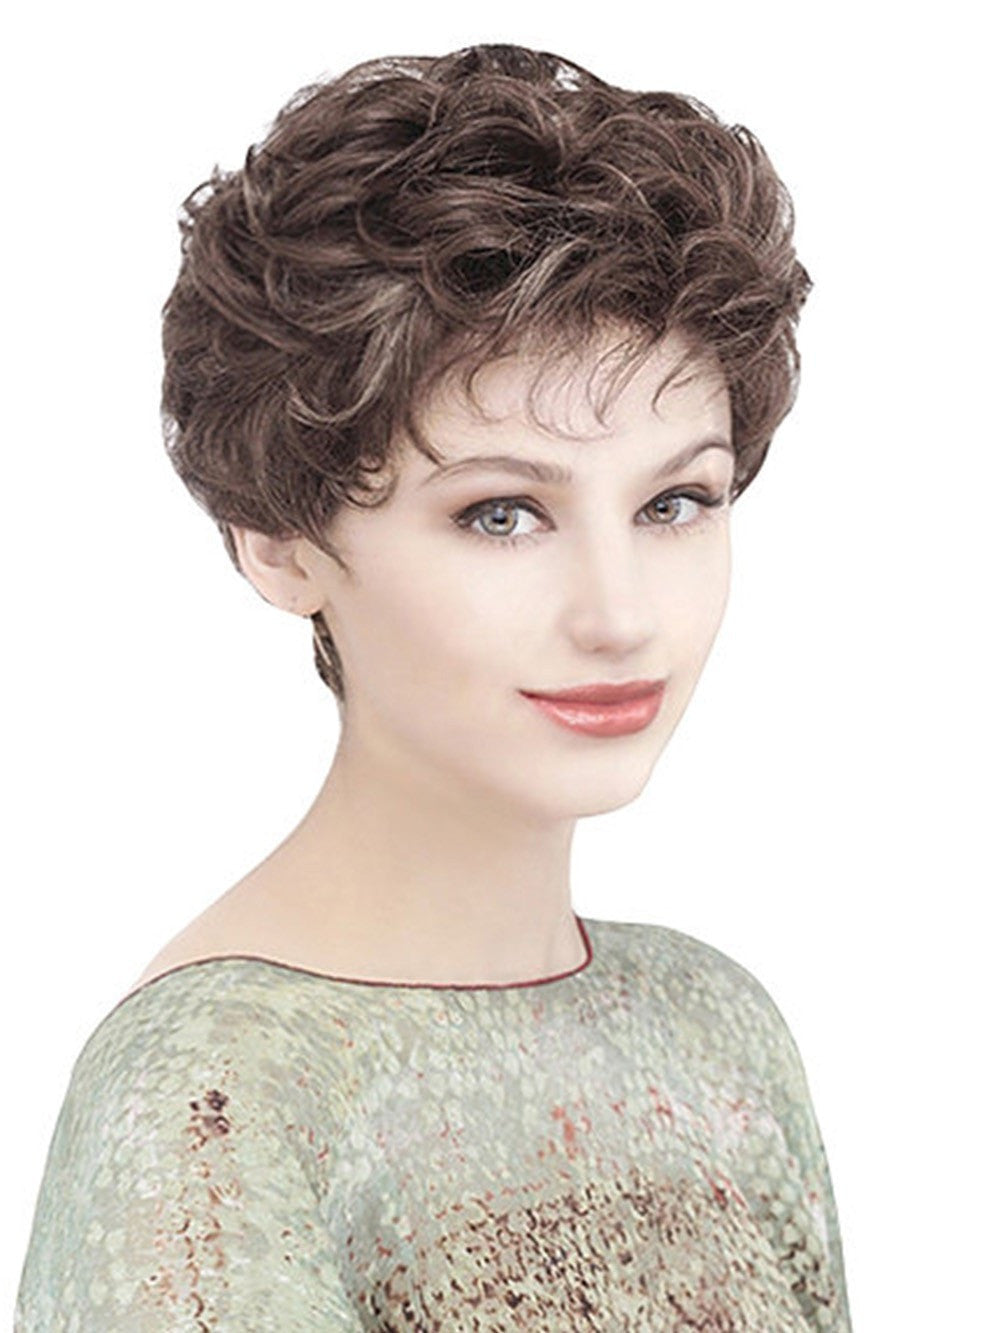 Sydney by Louis Ferre is a light weight short wig with short soft curls